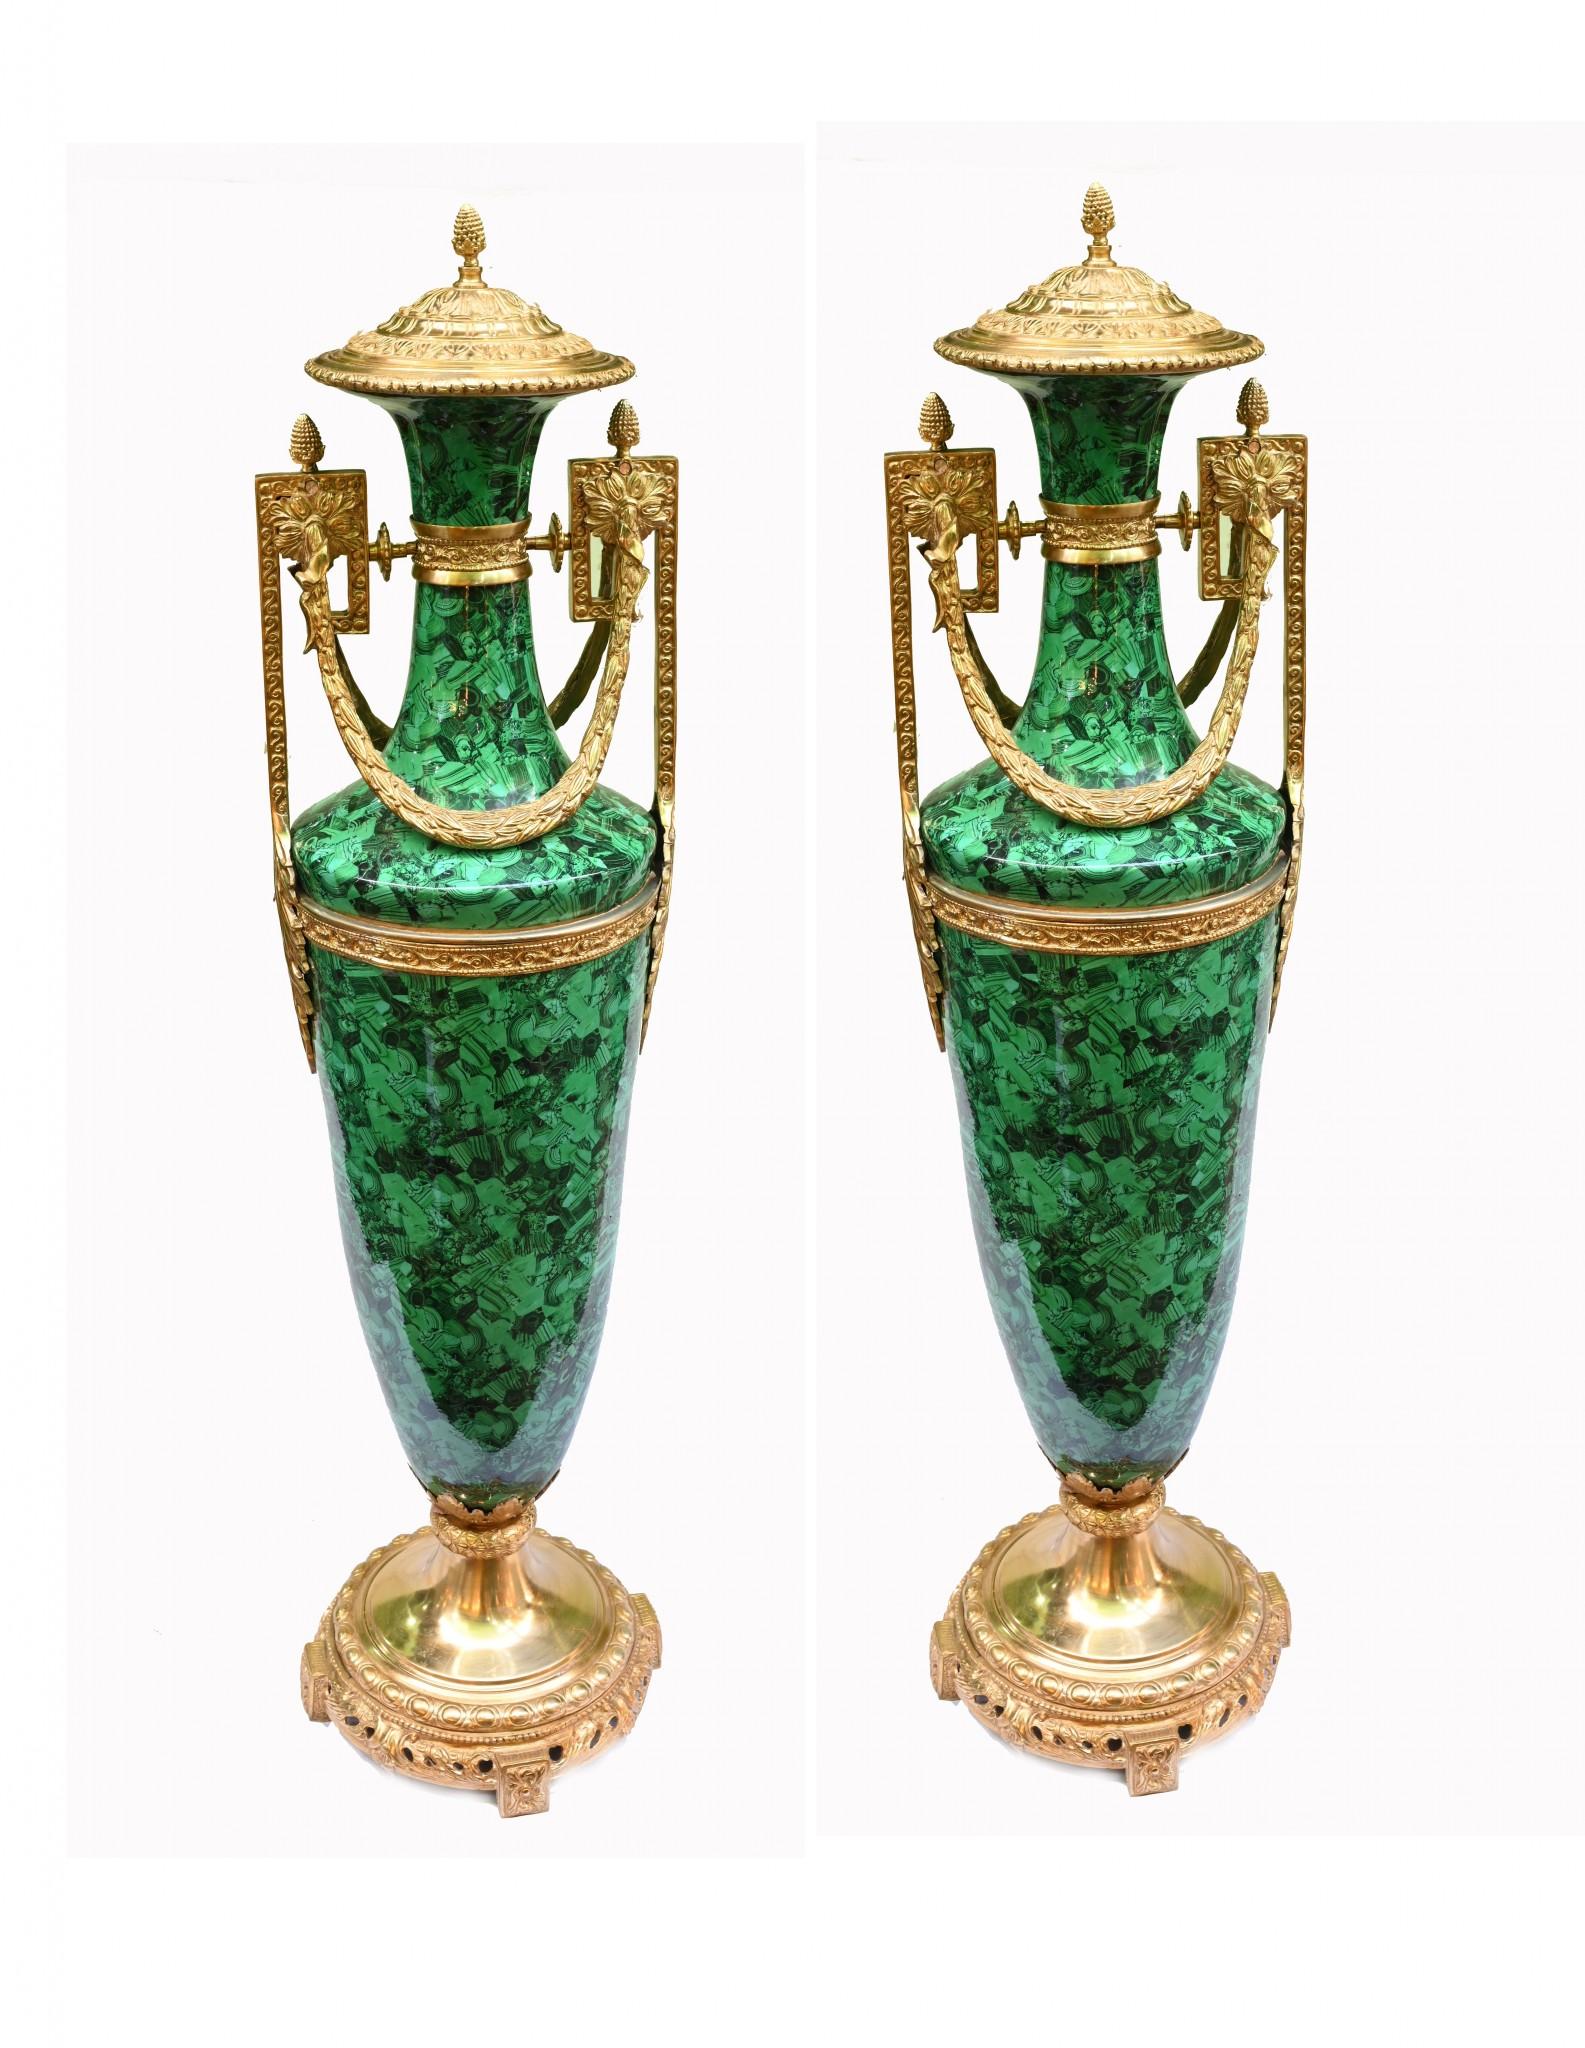 Stunning pair of large French urns in porcelain with a malachite decoration
Good size at over four feet tall - 134 CM - and of classic amphora form
Gilt fixtures are original and with great finish and patina Highly decorative pair ready to elevate